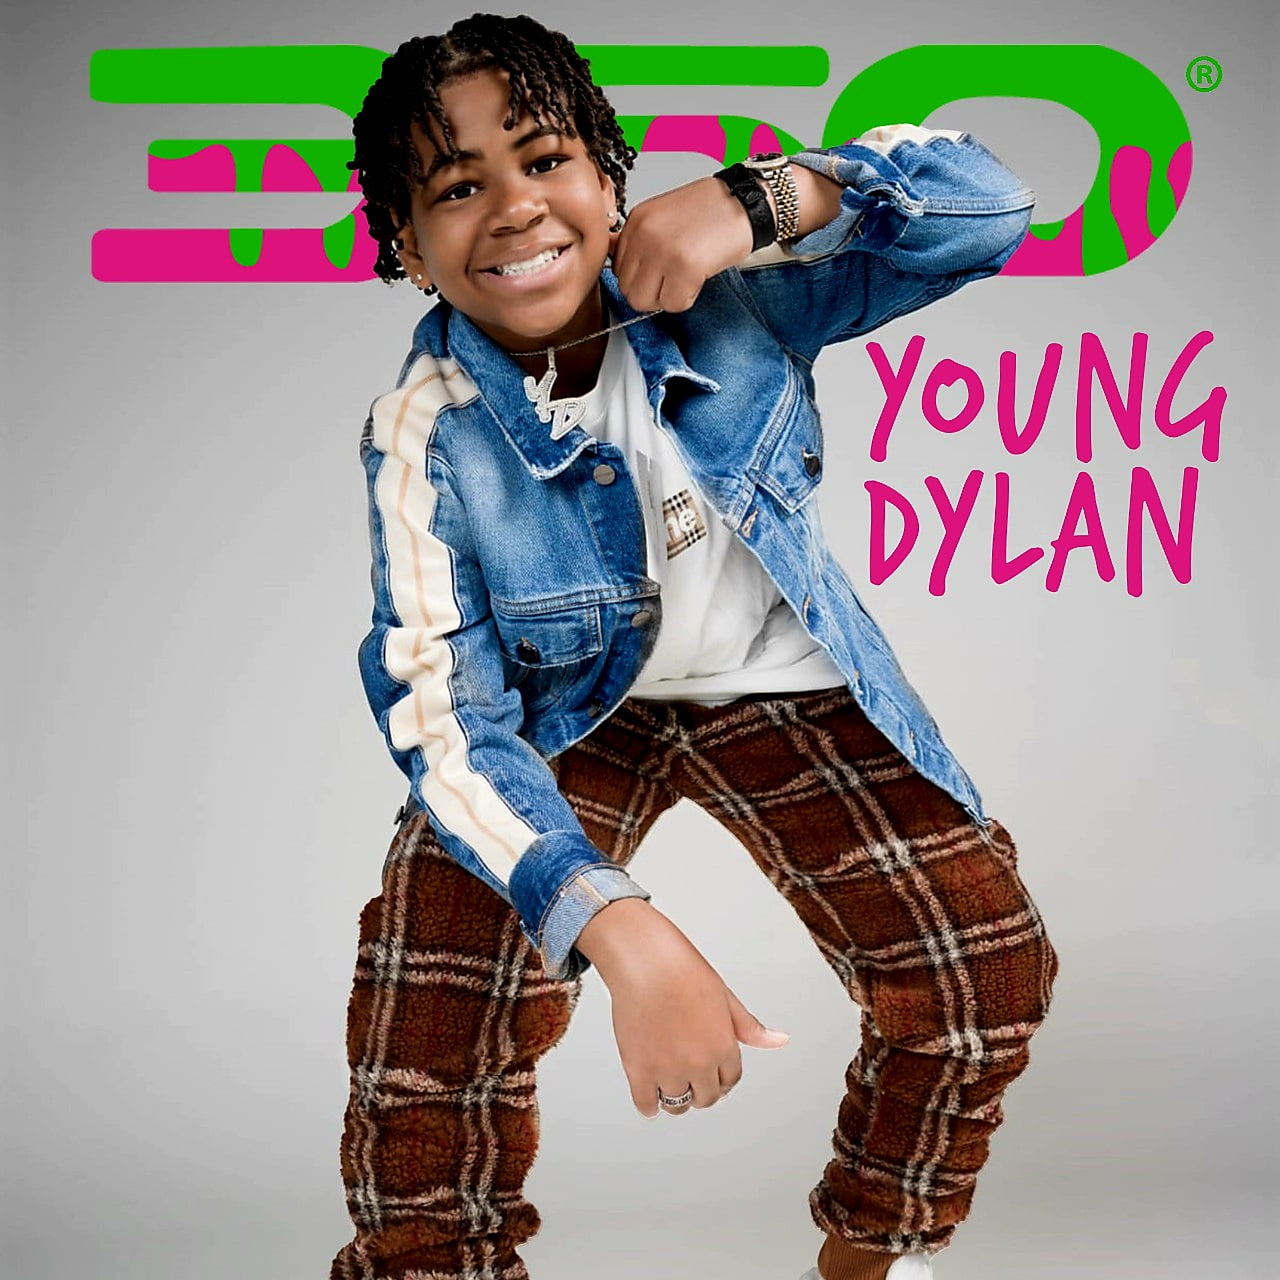 Young Dylan in 360 Magazine